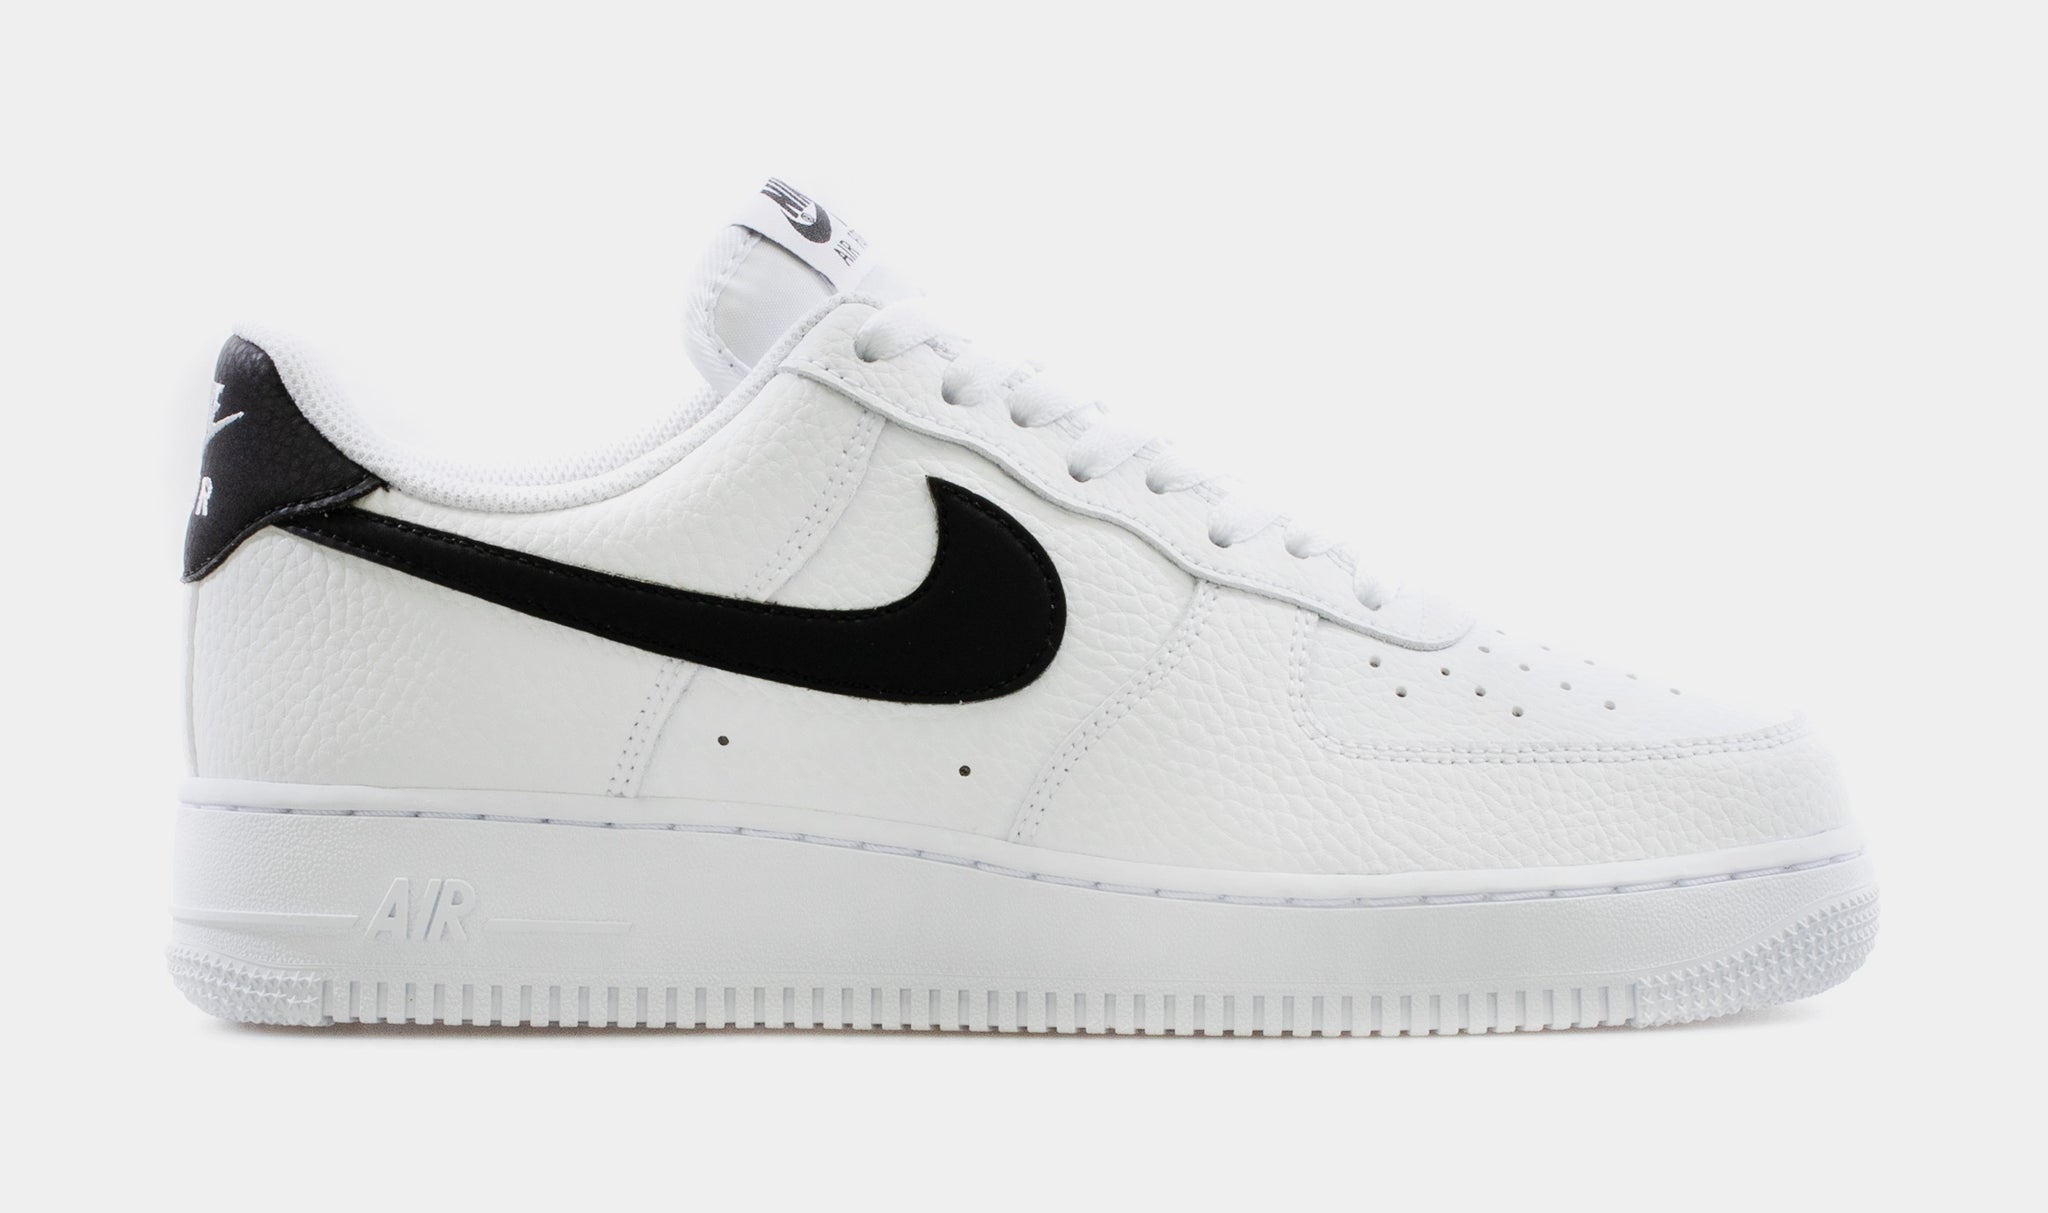 Nike Air Force 1 07 Mens Lifestyle Shoes White CT2302-100 – Shoe Palace